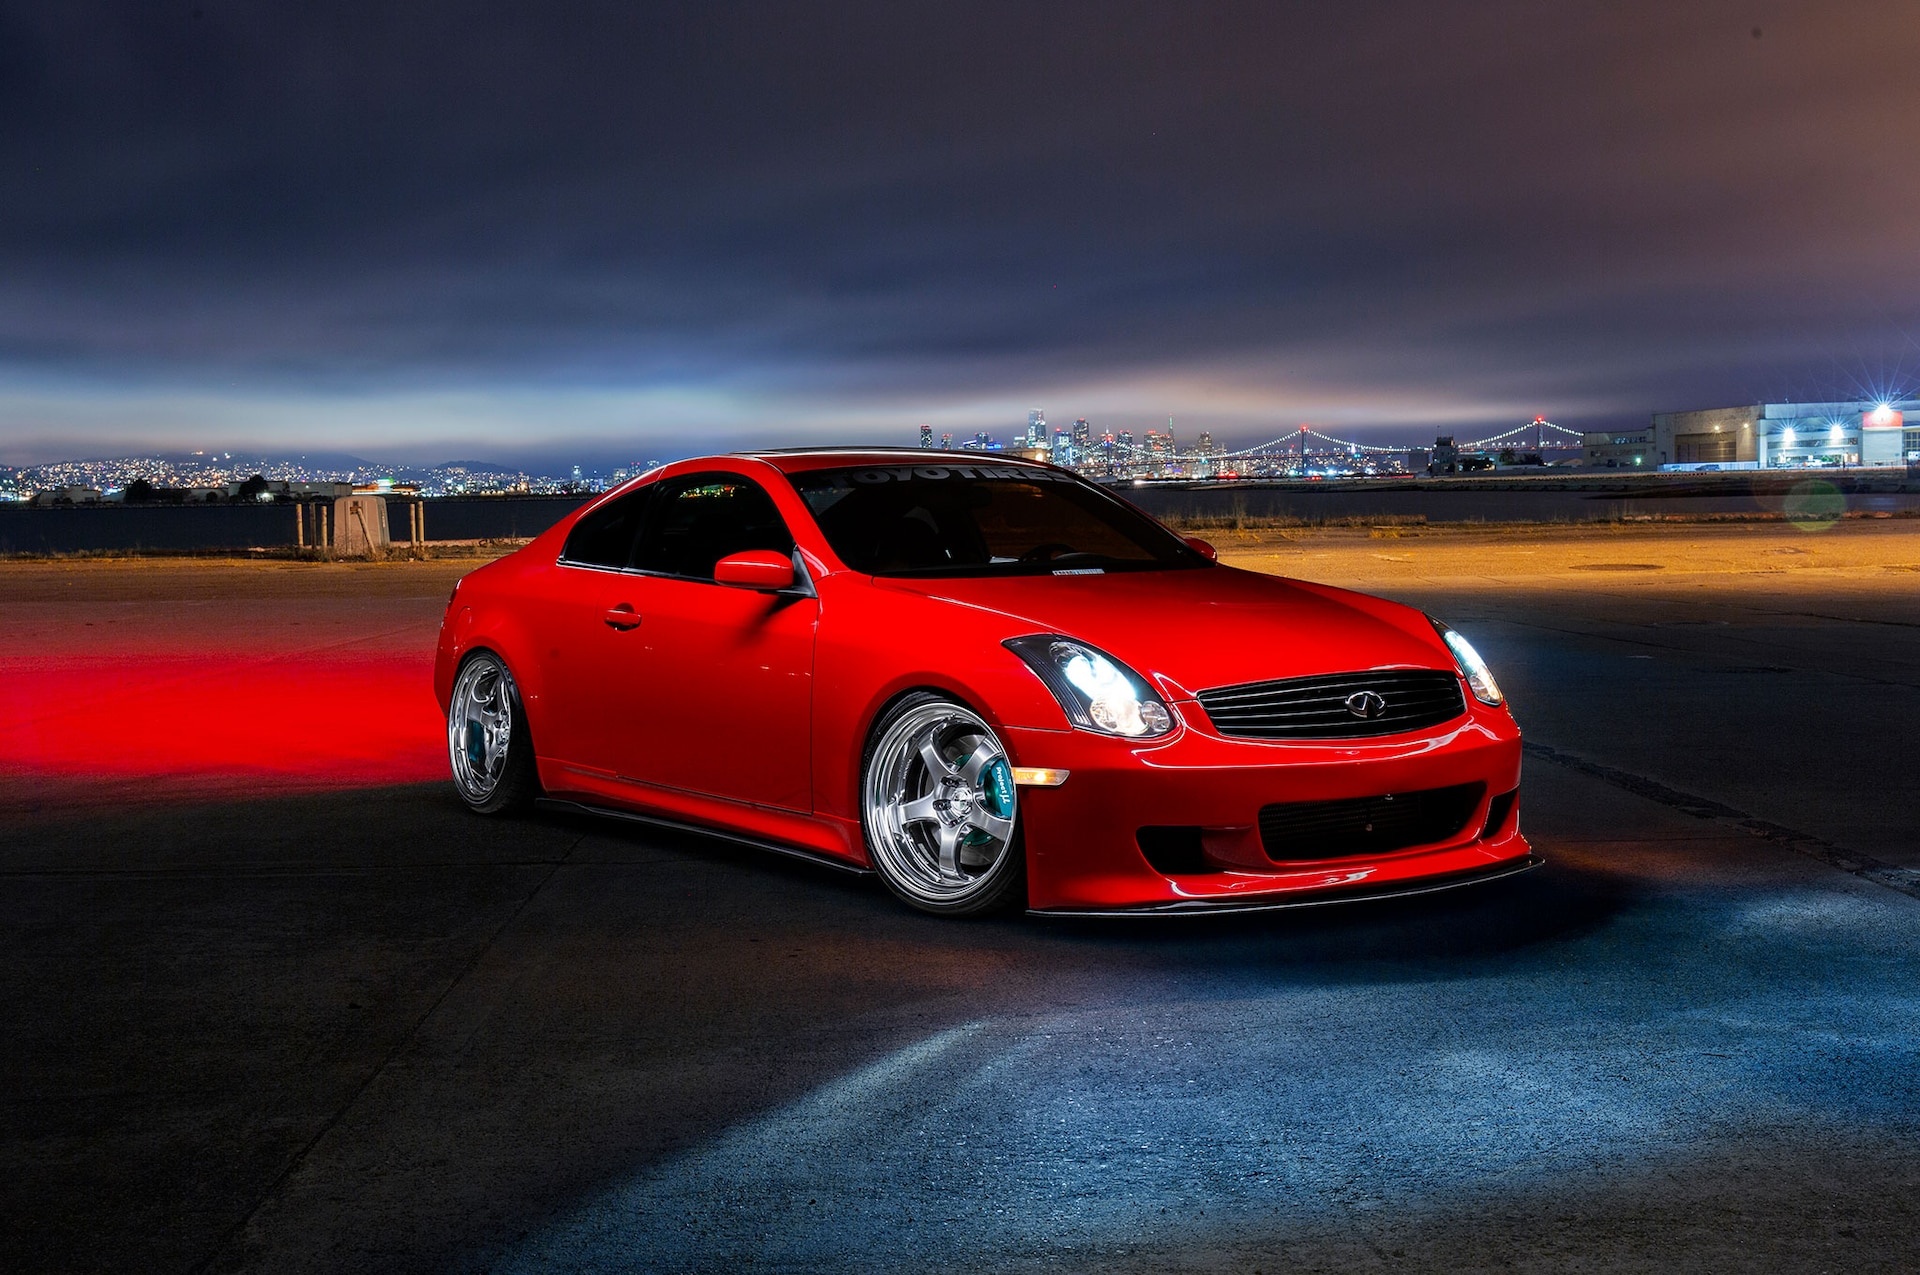 Spotless Infiniti G35 Coupe, Power-packed performance, Supercharged engine, Sleek and stylish, 1920x1280 HD Desktop